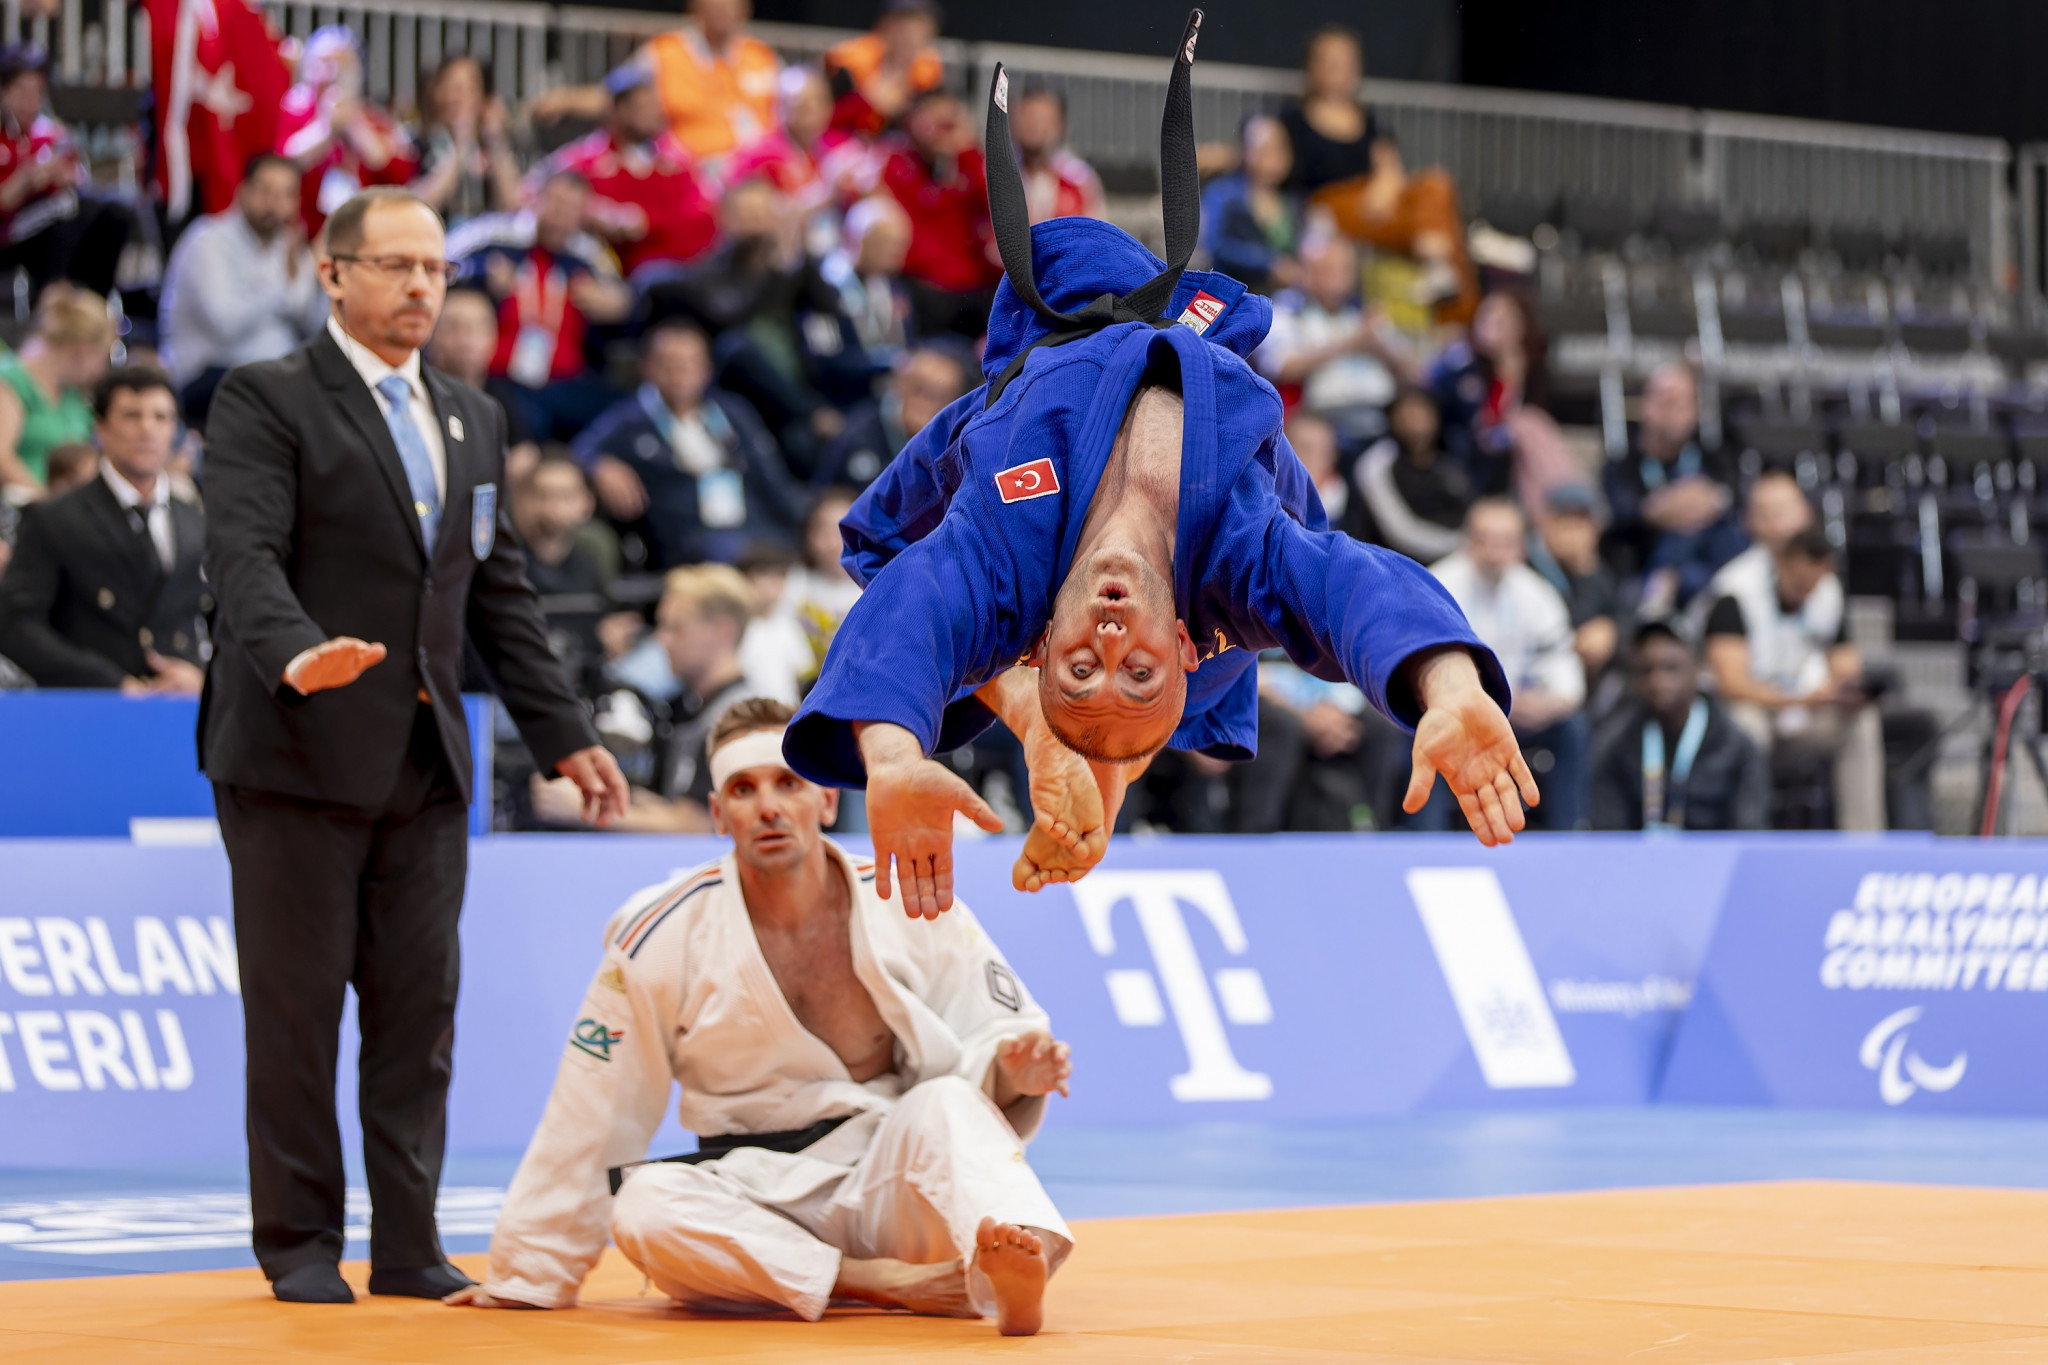 Para judoka demonstrated amazing athleticism during the first day of competition ©EPC